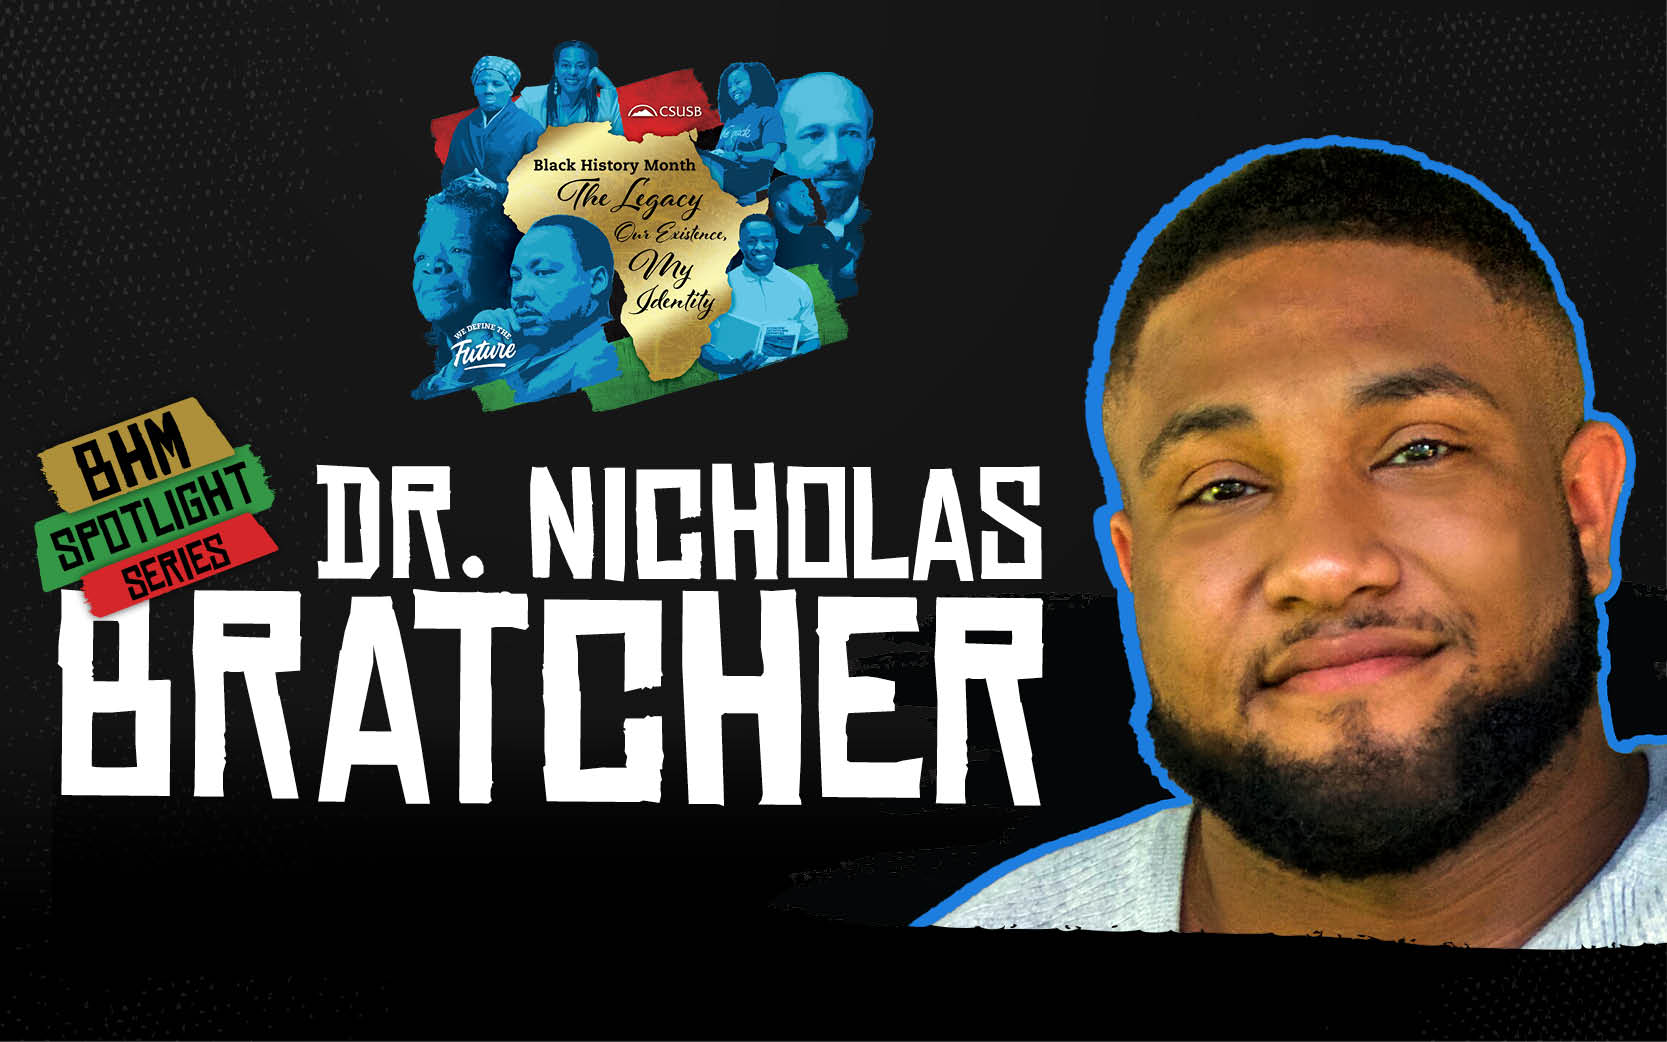 Black History Month: The Legacy, Our Existence, My Identity, BHM Spotlight Series: Dr. Nicholas Bratcher